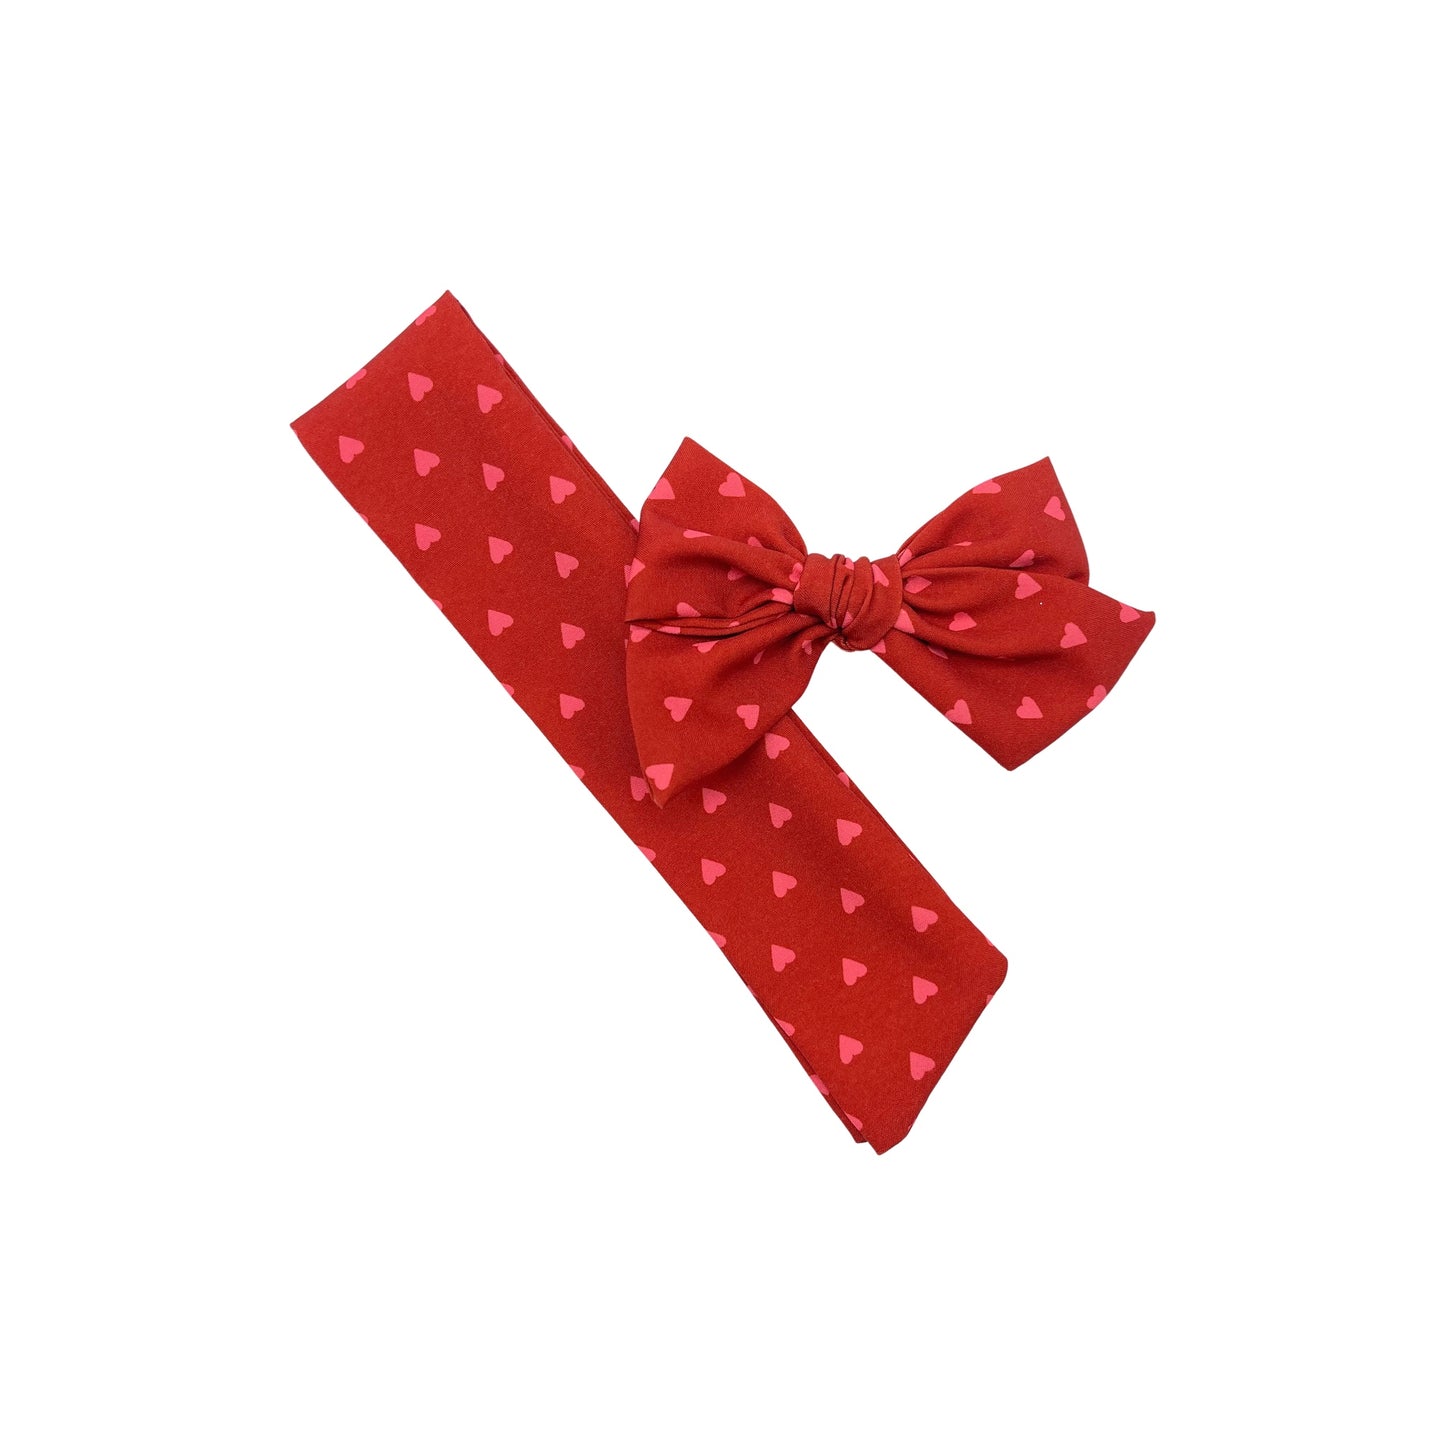 Tied and untied red Ruth style fabric bow strip with pink heart pattern.